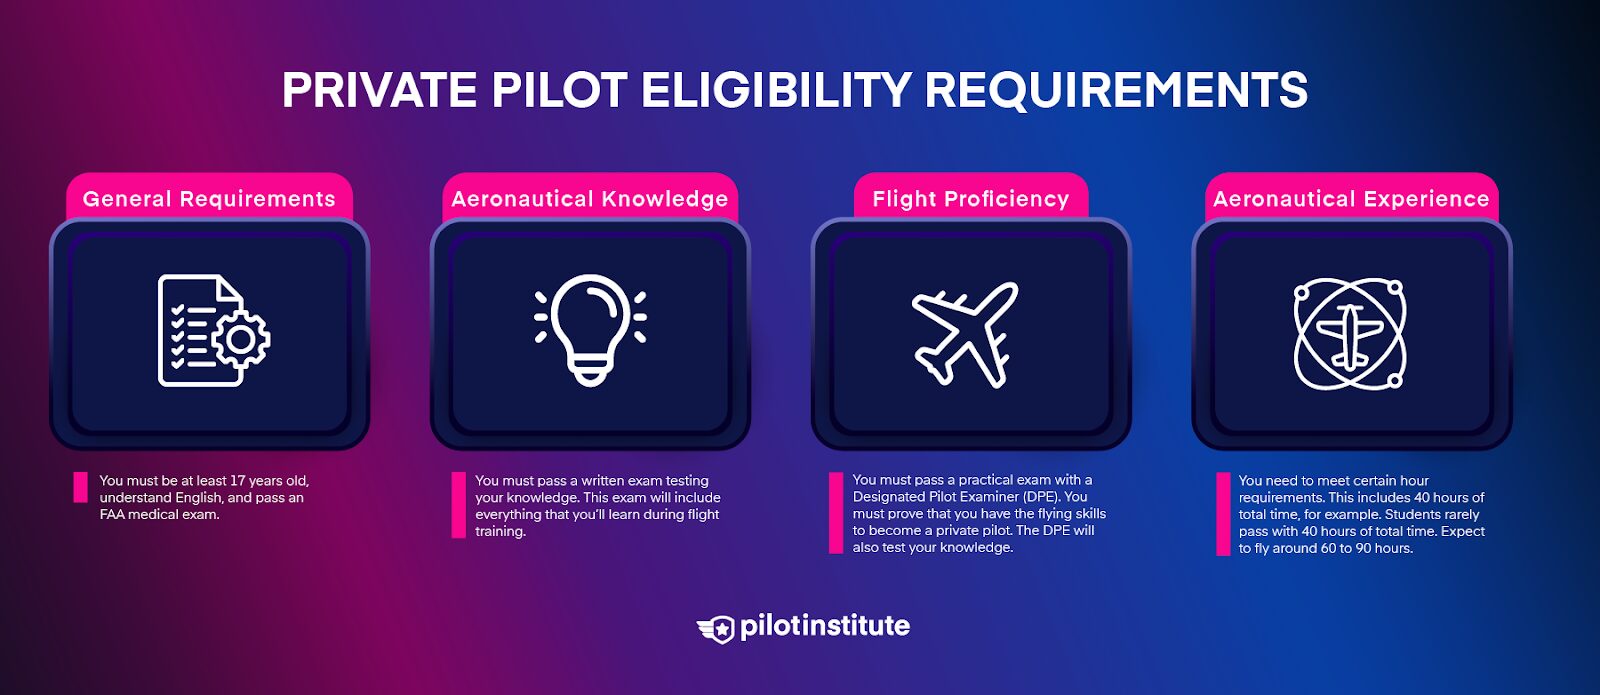 A diagram outlining the eligibility requirements for obtaining a private pilot certificate.